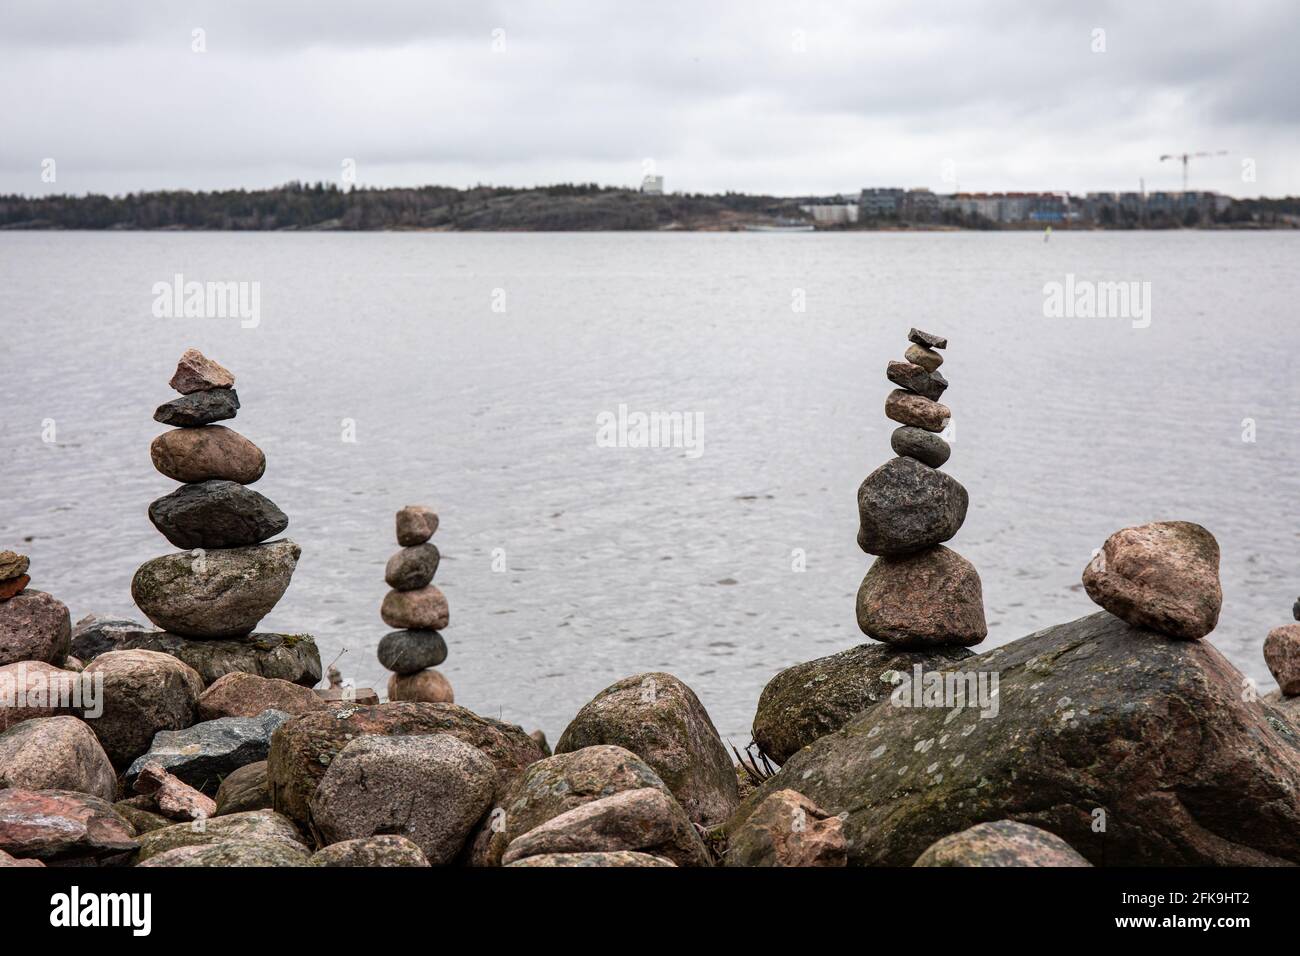 Piled up or stacked rocks on shore in Helsinki, Finland Stock Photo